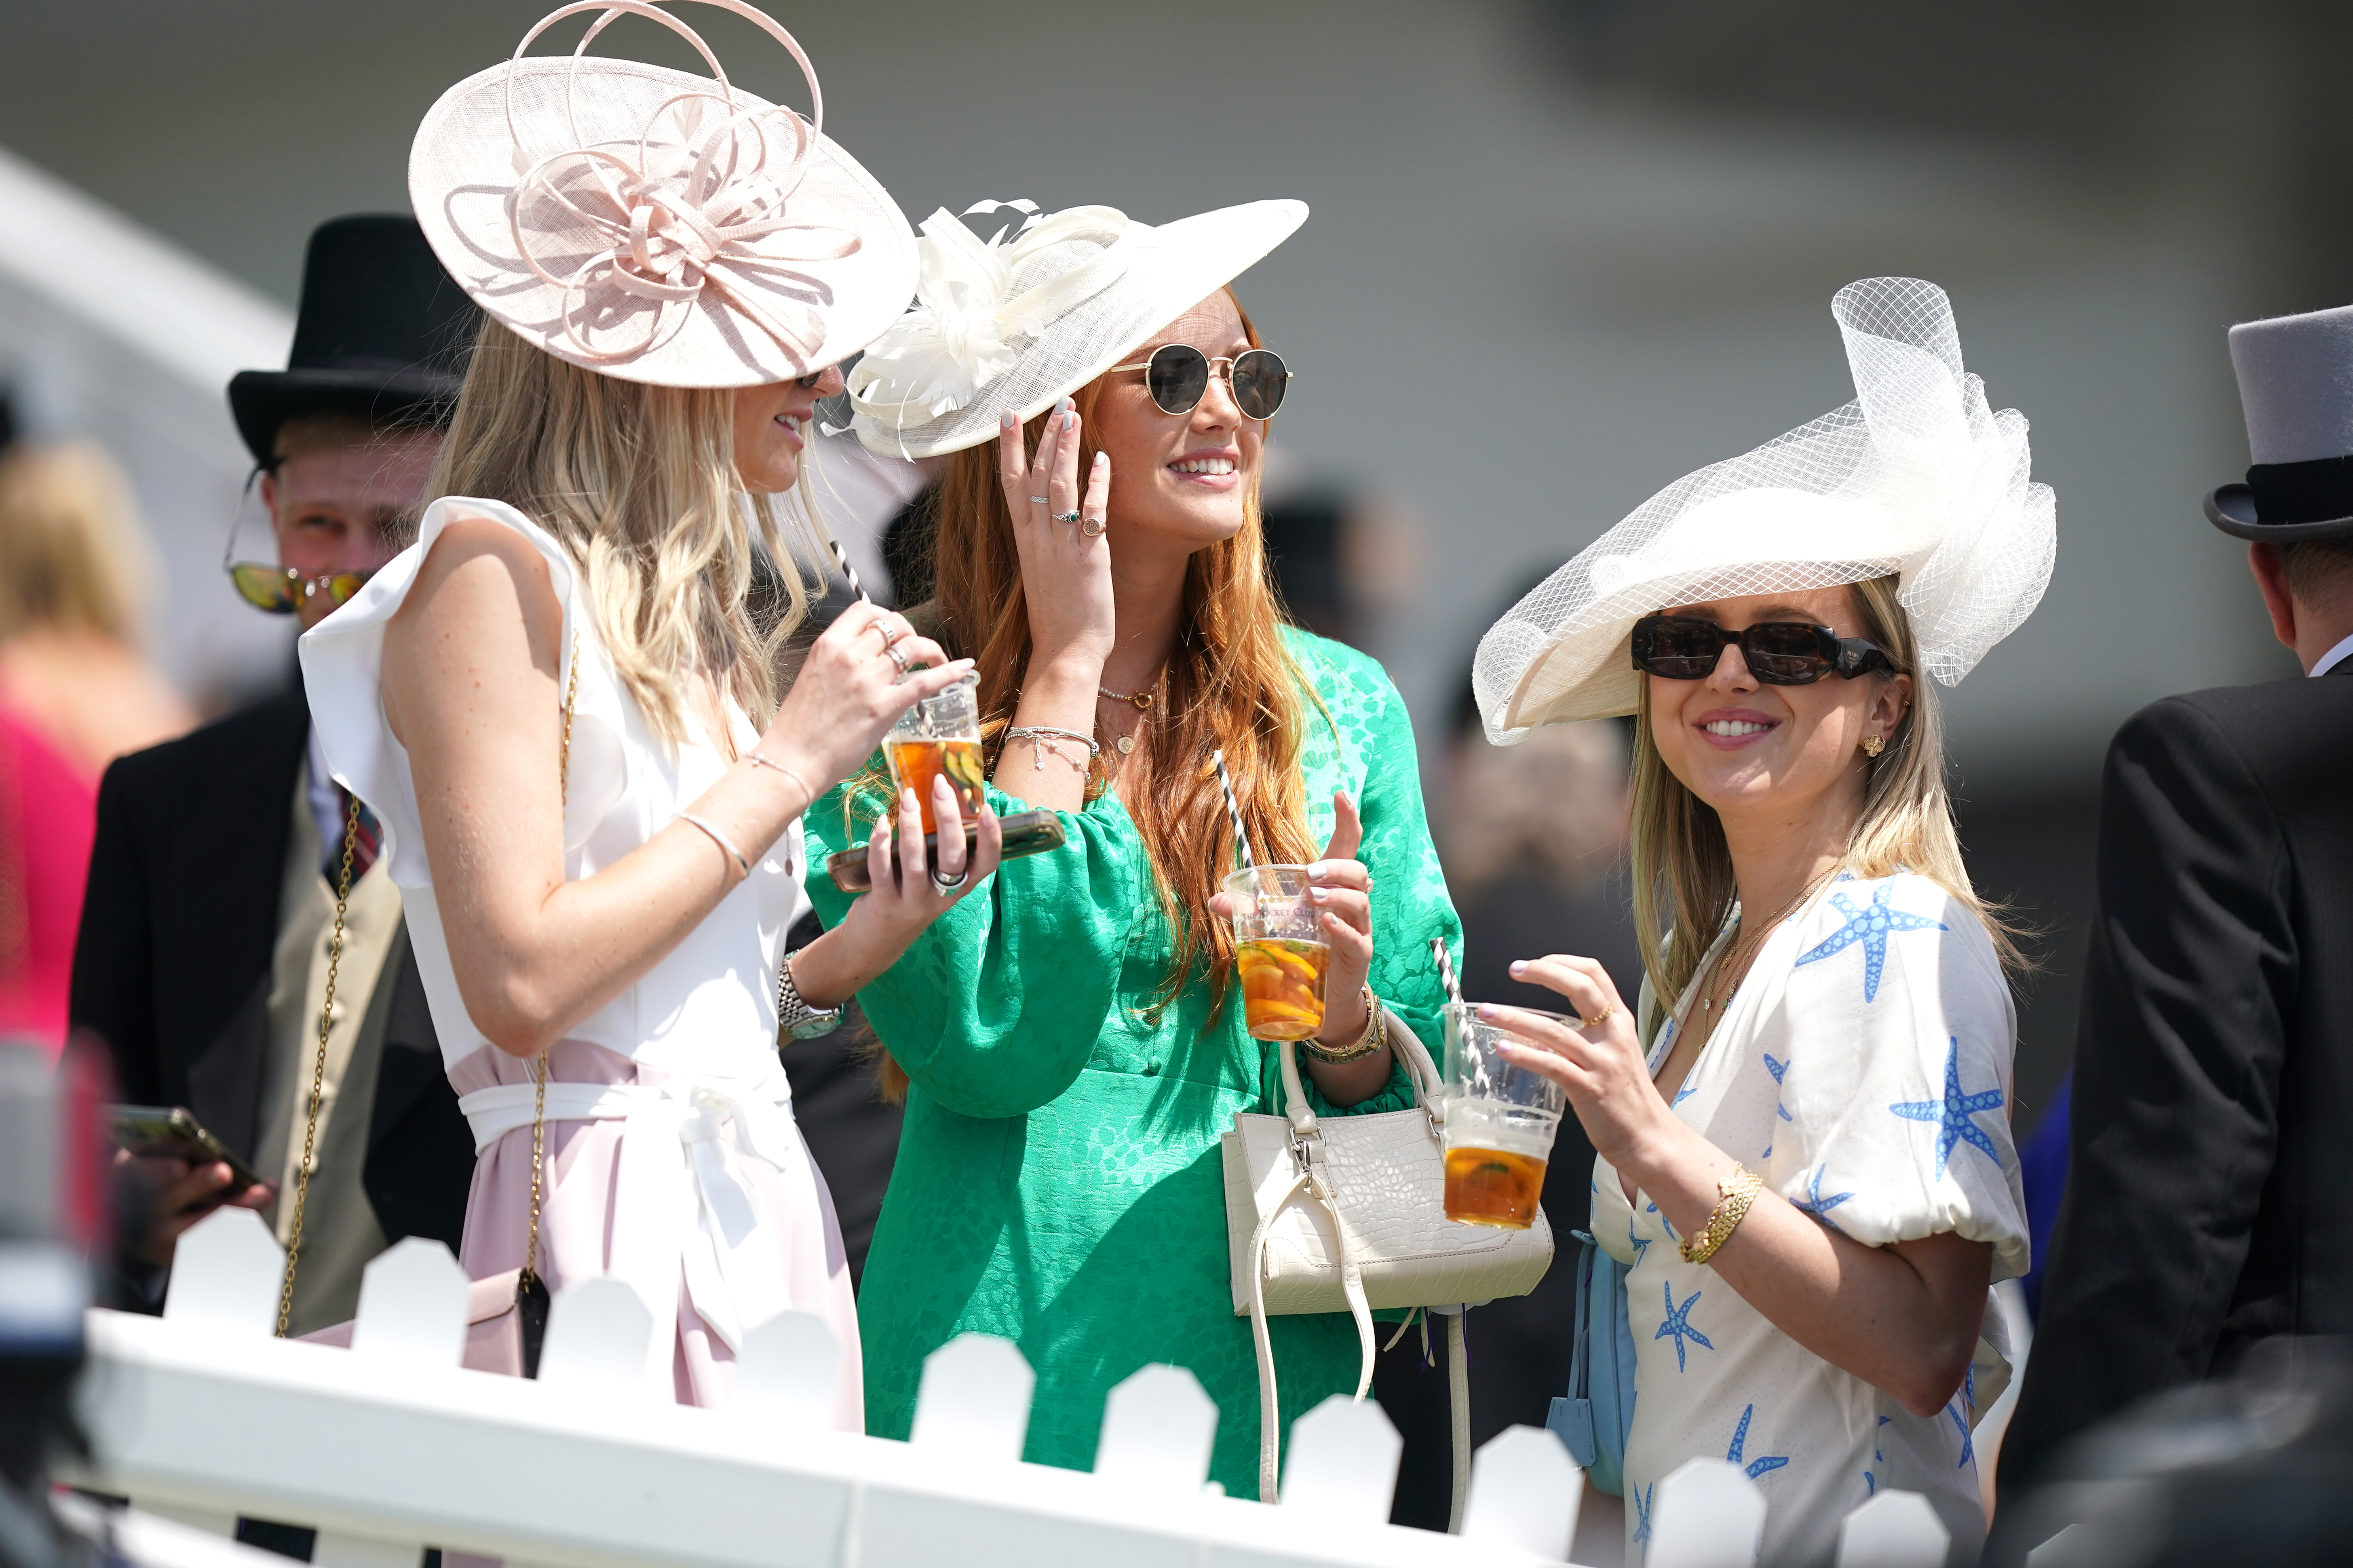 , Glam racegoers pull out all the style stops as they arrive for Derby Day at Epsom Downs racecourse